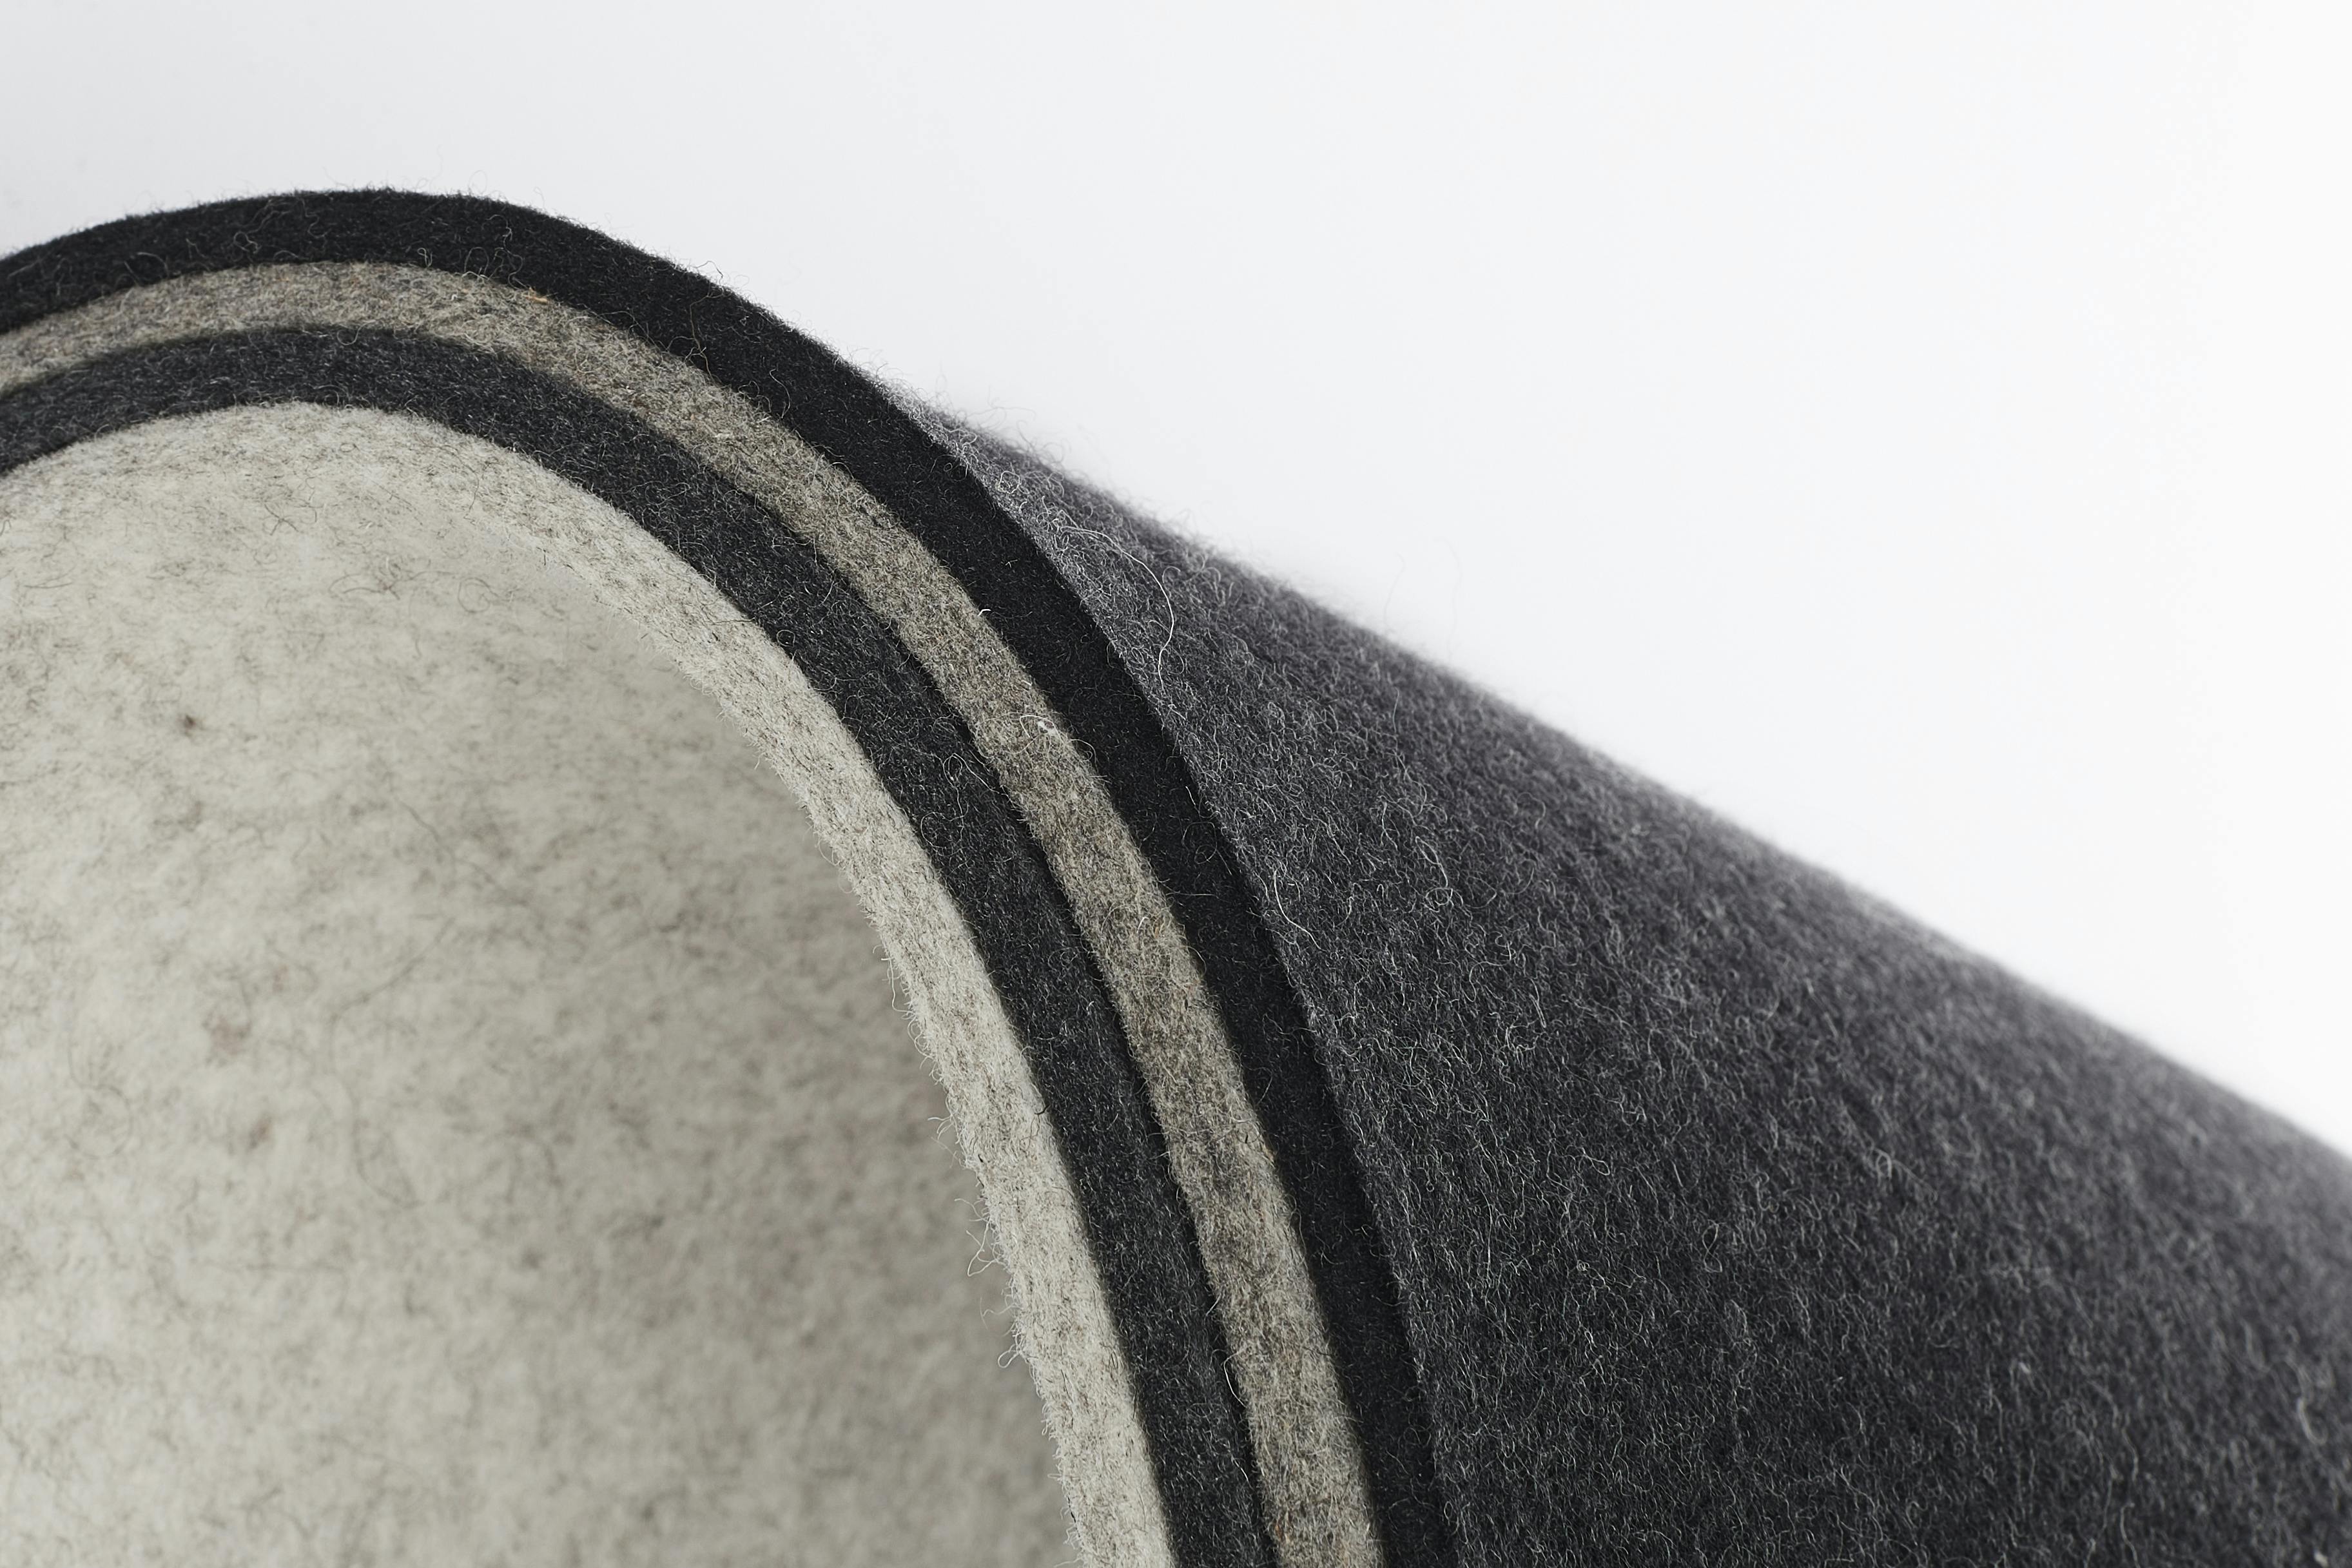 PDP Image: Felt Tops (The Nightstand / Heathered Grey) - 3:2 - Four rolled 